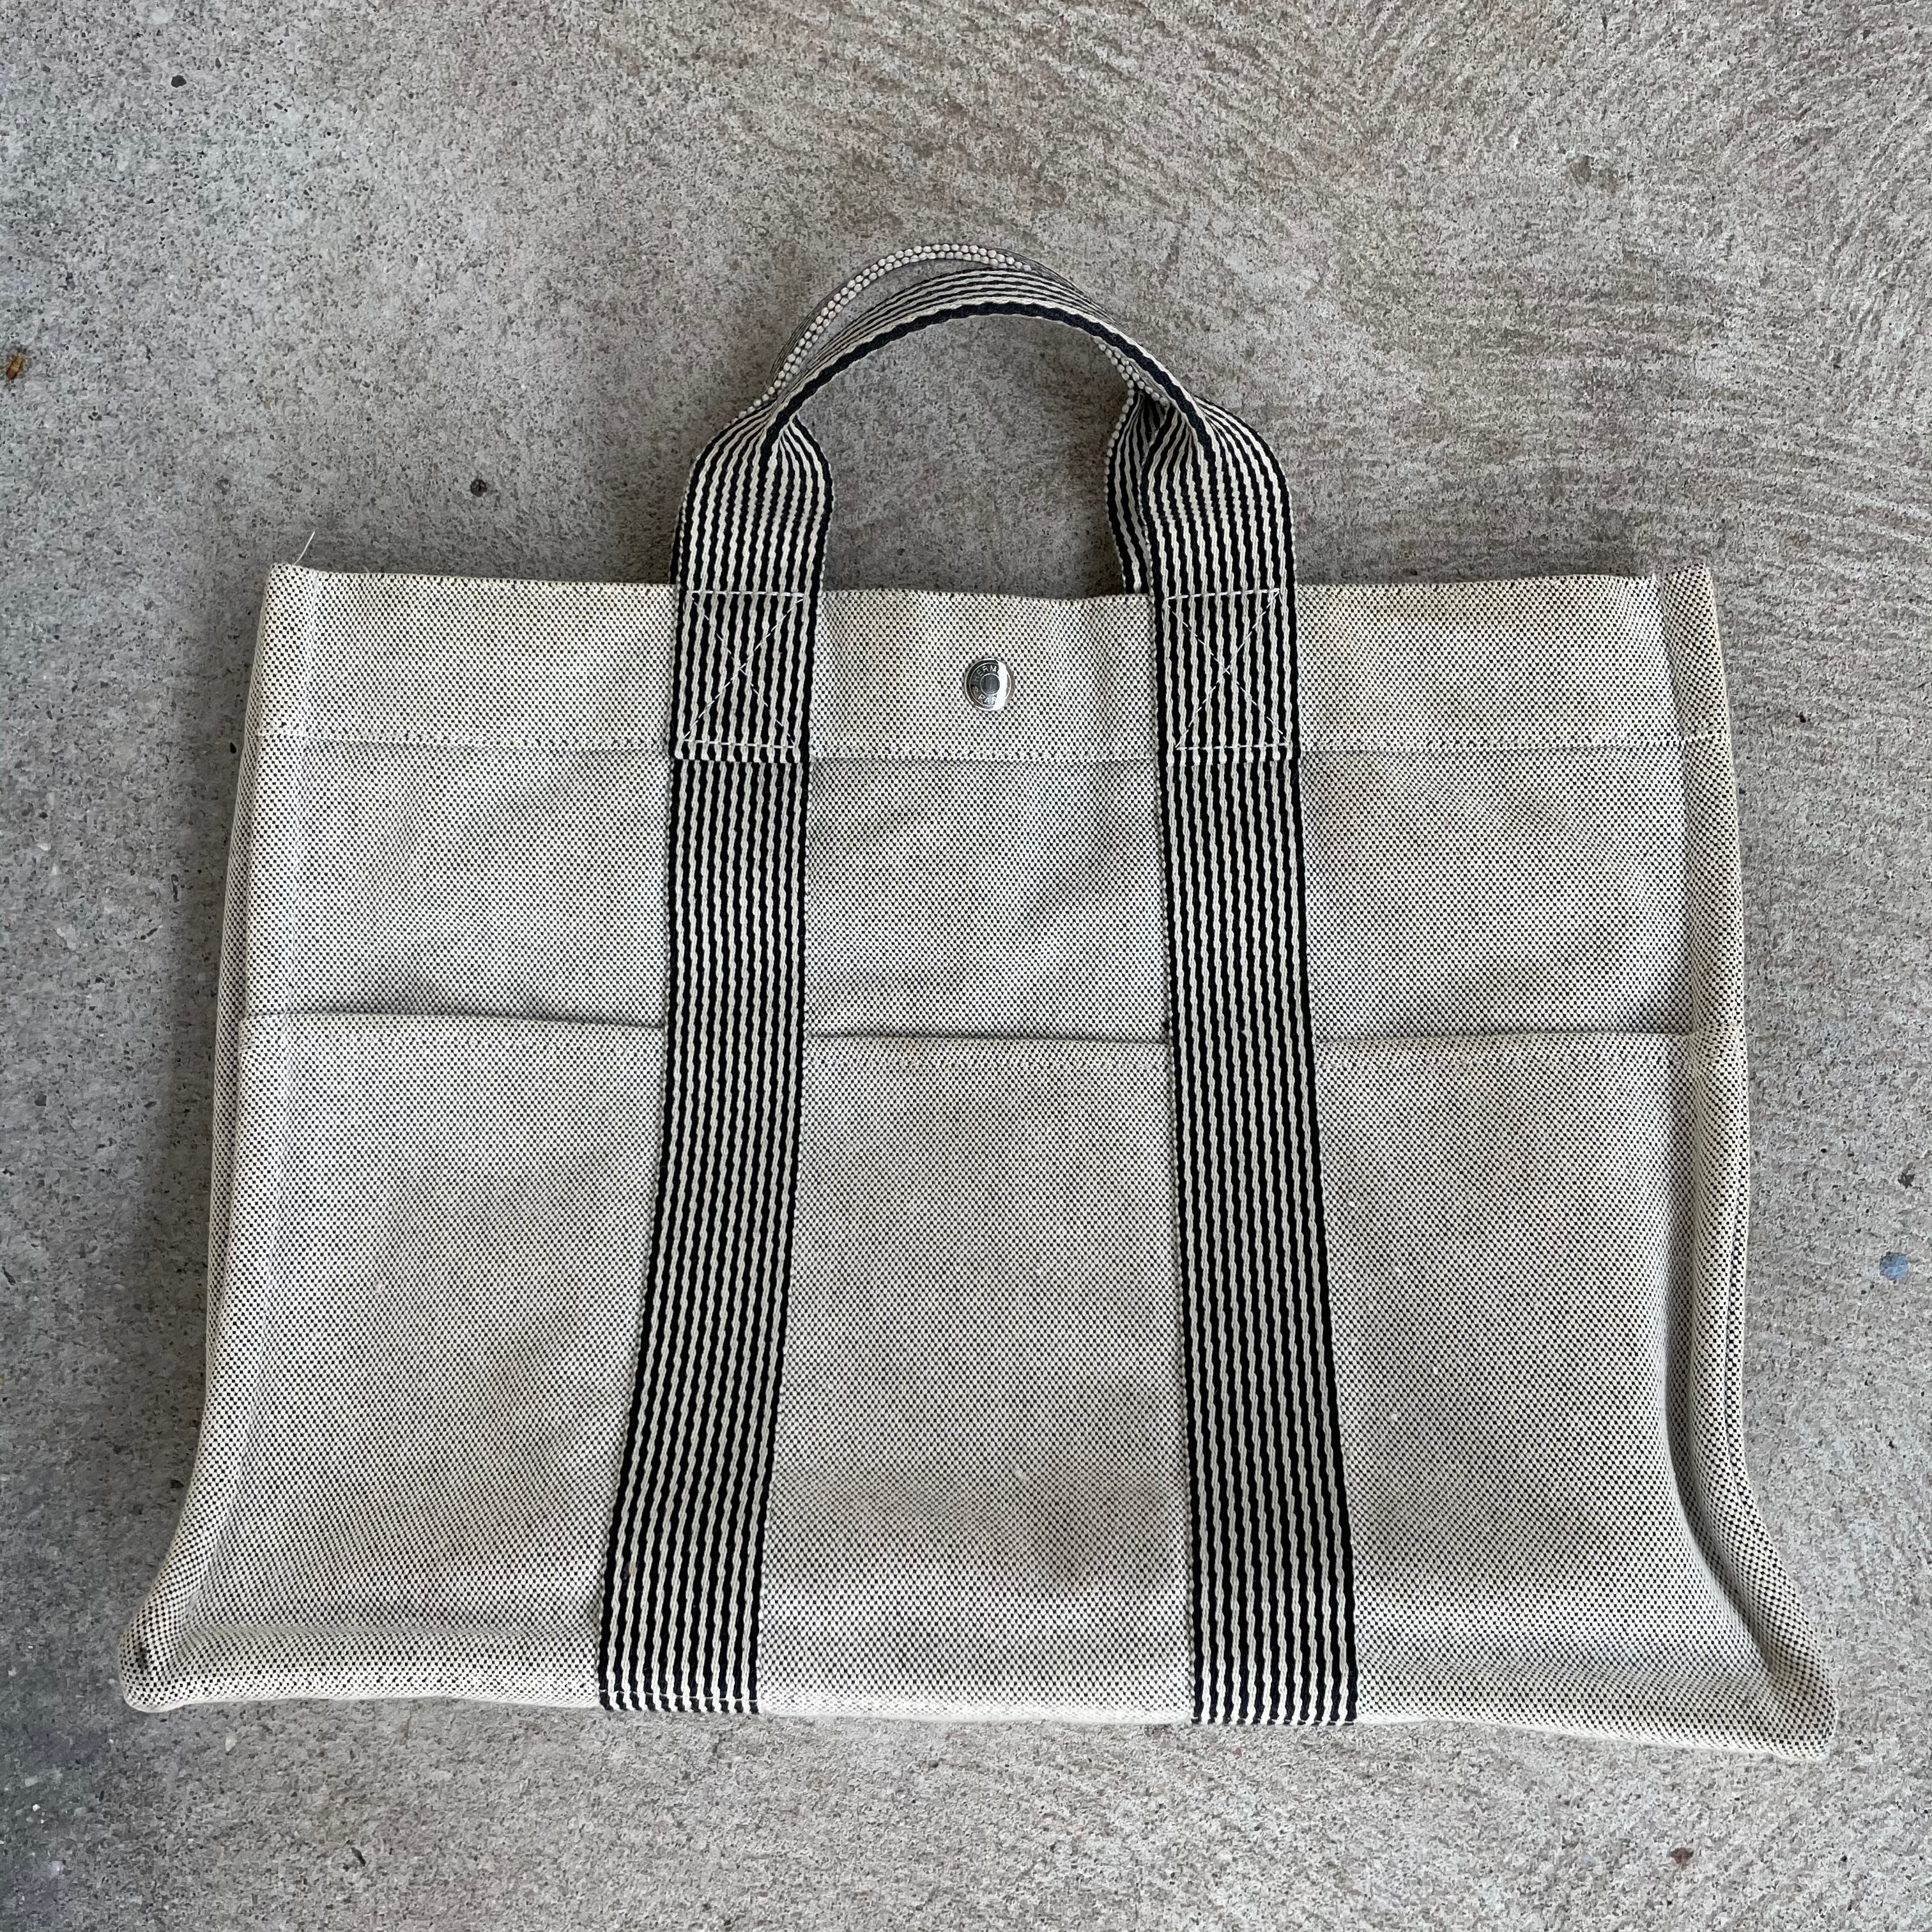 HERMES Authentic Herline Bag Gray Canvas Tout Tote Bag 